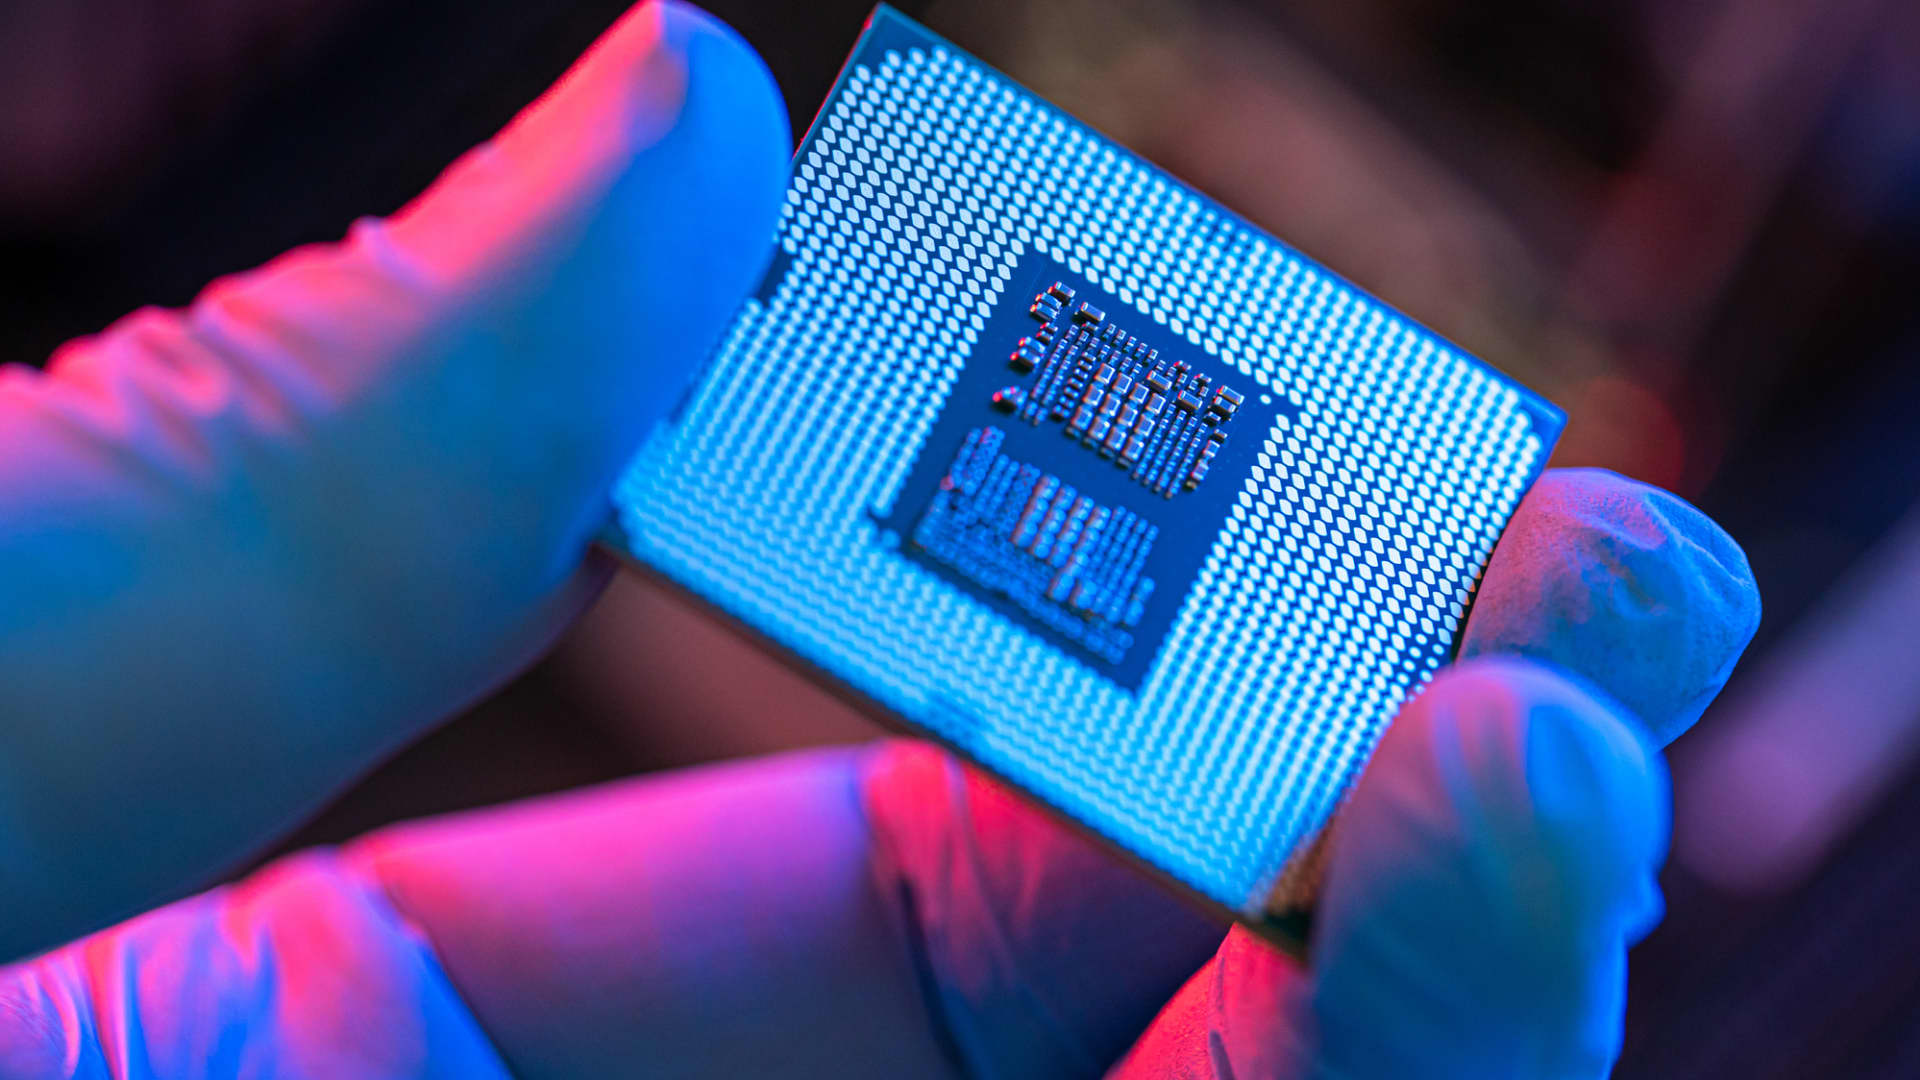 Britain launches .2 billion semiconductor plan after U.S. and EU splurge on chips